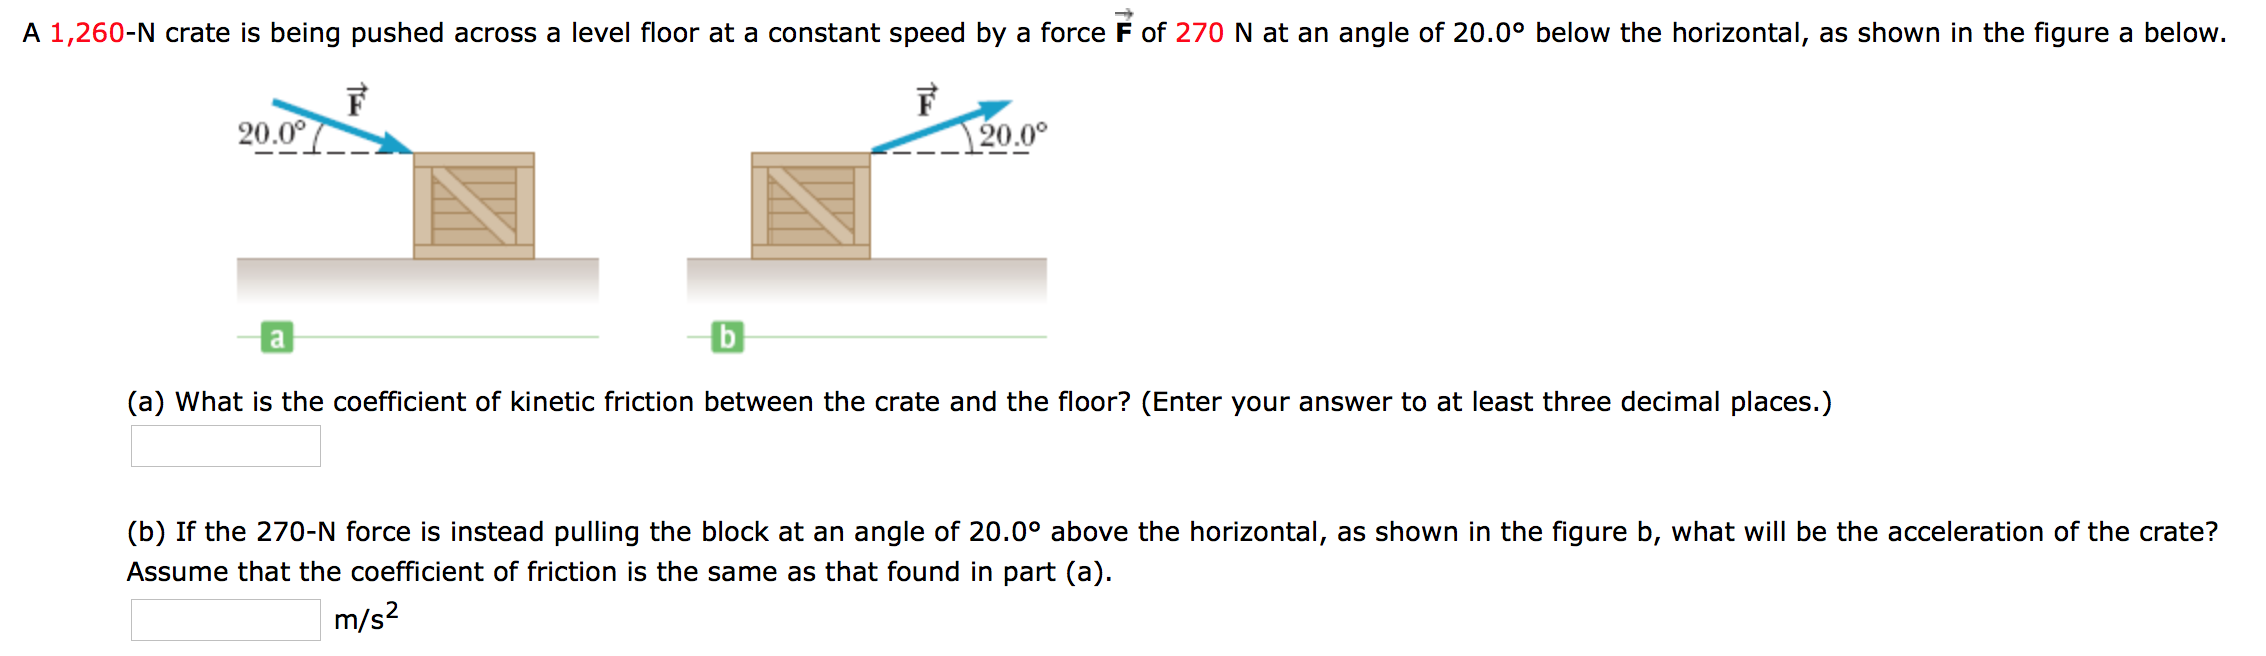 A 1,260-N crate is being pushed across a level floor at a constant speed by a force F of 270 N at an angle of 20.0° below the horizontal, as shown in the figure a below.
20.00
20.0°
(a) What is the coefficient of kinetic friction between the crate and the floor? (Enter your answer to at least three decimal places.)
(b) If the 270-N force is instead pulling the block at an angle of 20.0° above the horizontal, as shown in the figure b, what will be the acceleration of the crate?
Assume that the coefficient of friction is the same as that found in part (a).
m/s2
